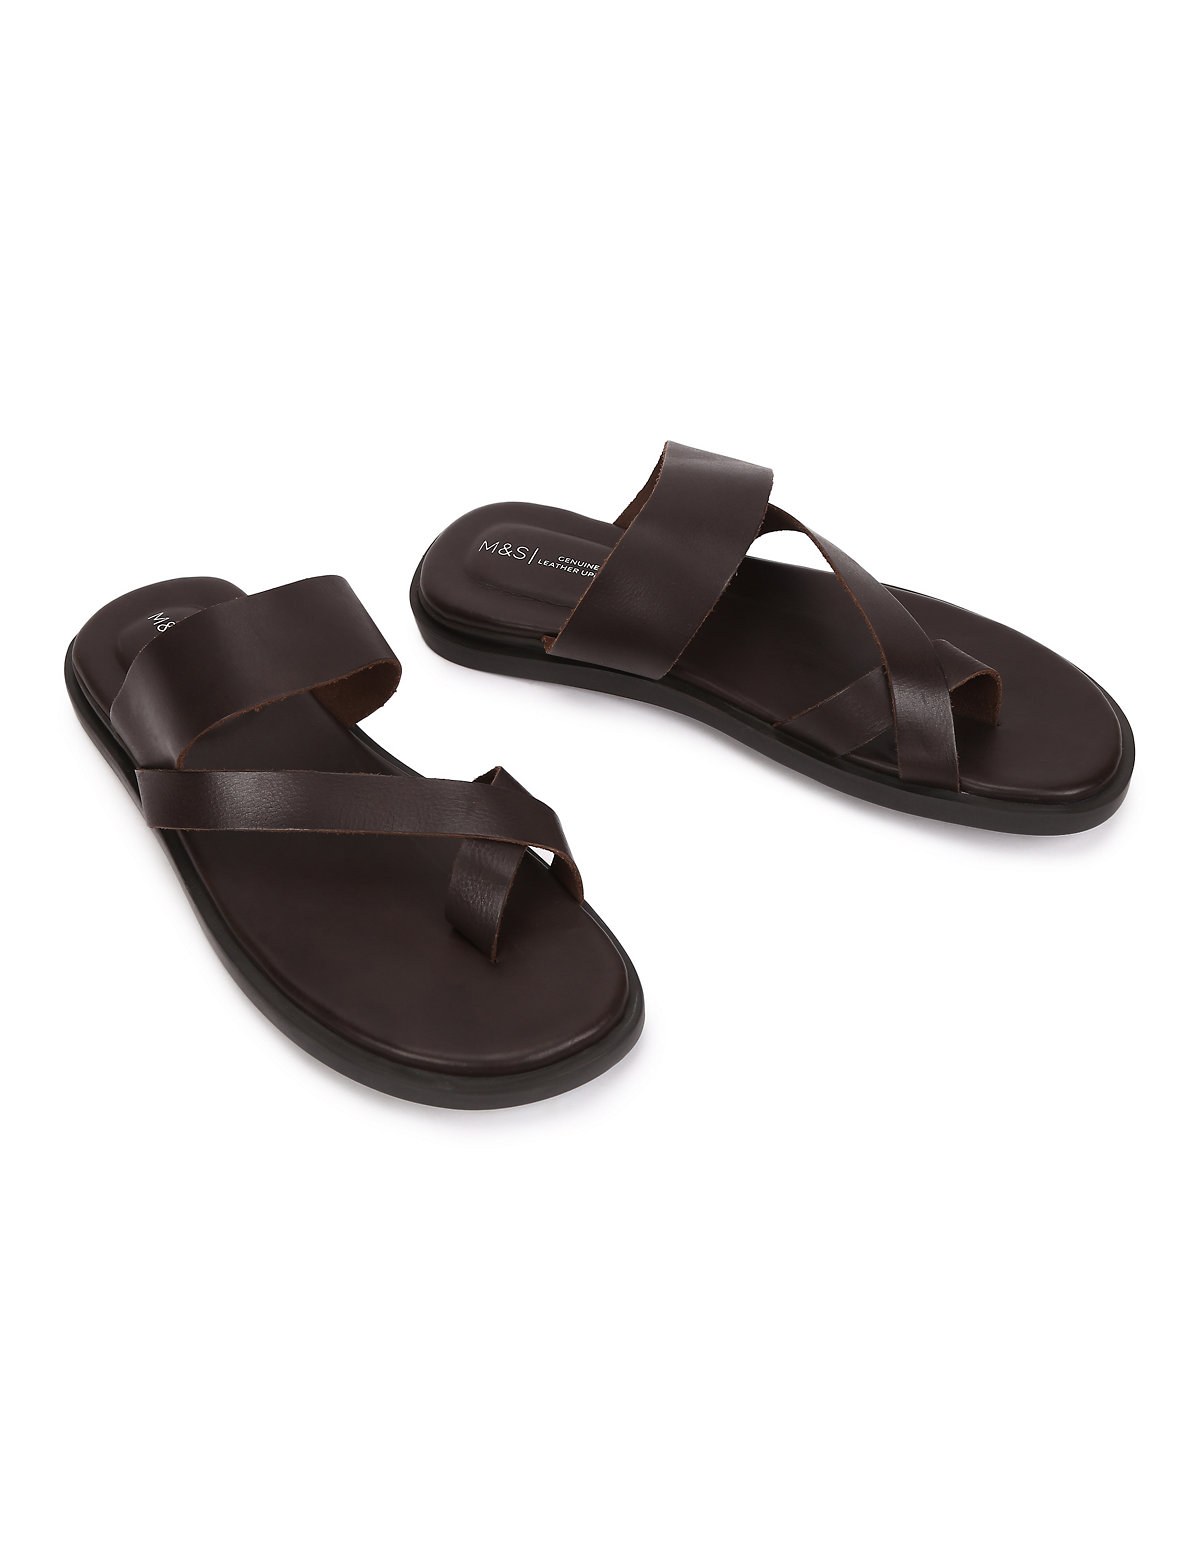 Outdoor Sport Leather Sandals